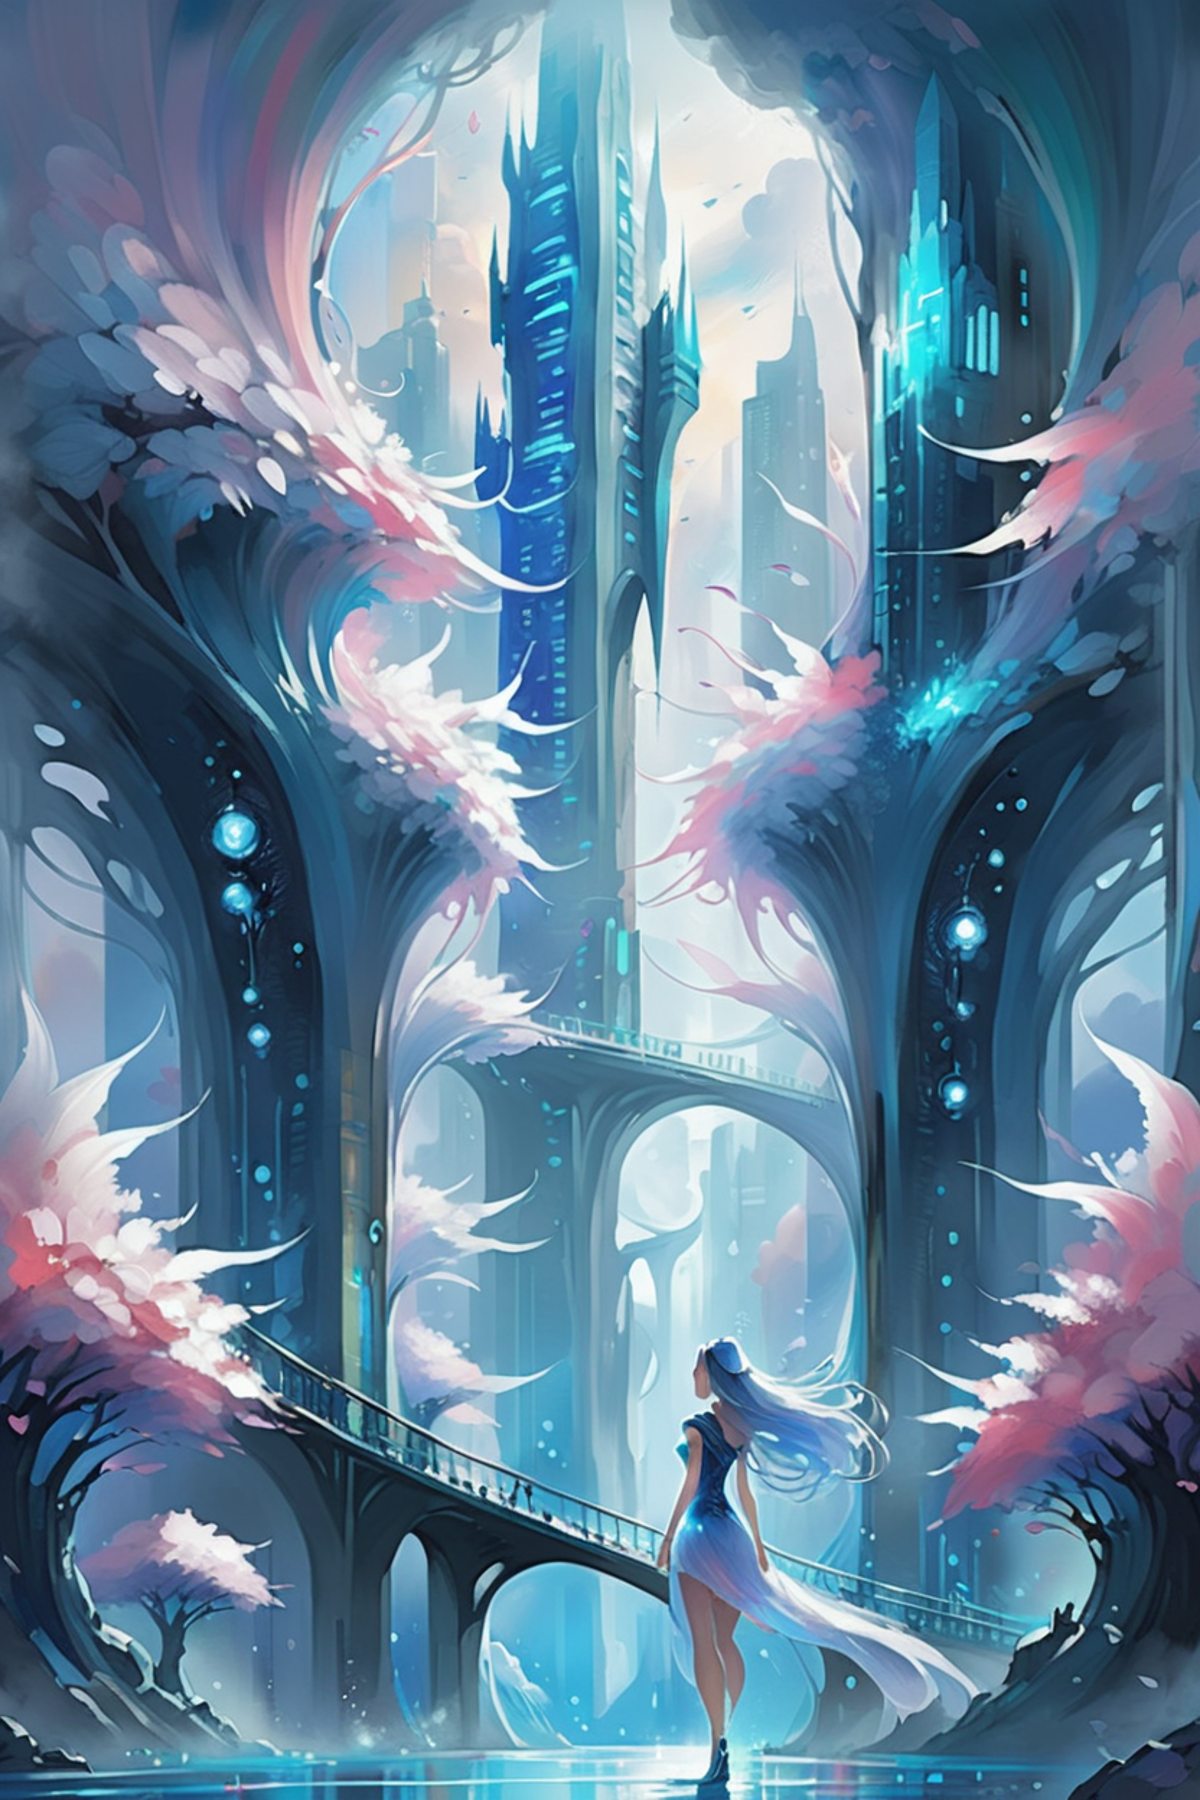 A fantasy painting of a girl walking through a futuristic city surrounded by tall buildings and a bridge.